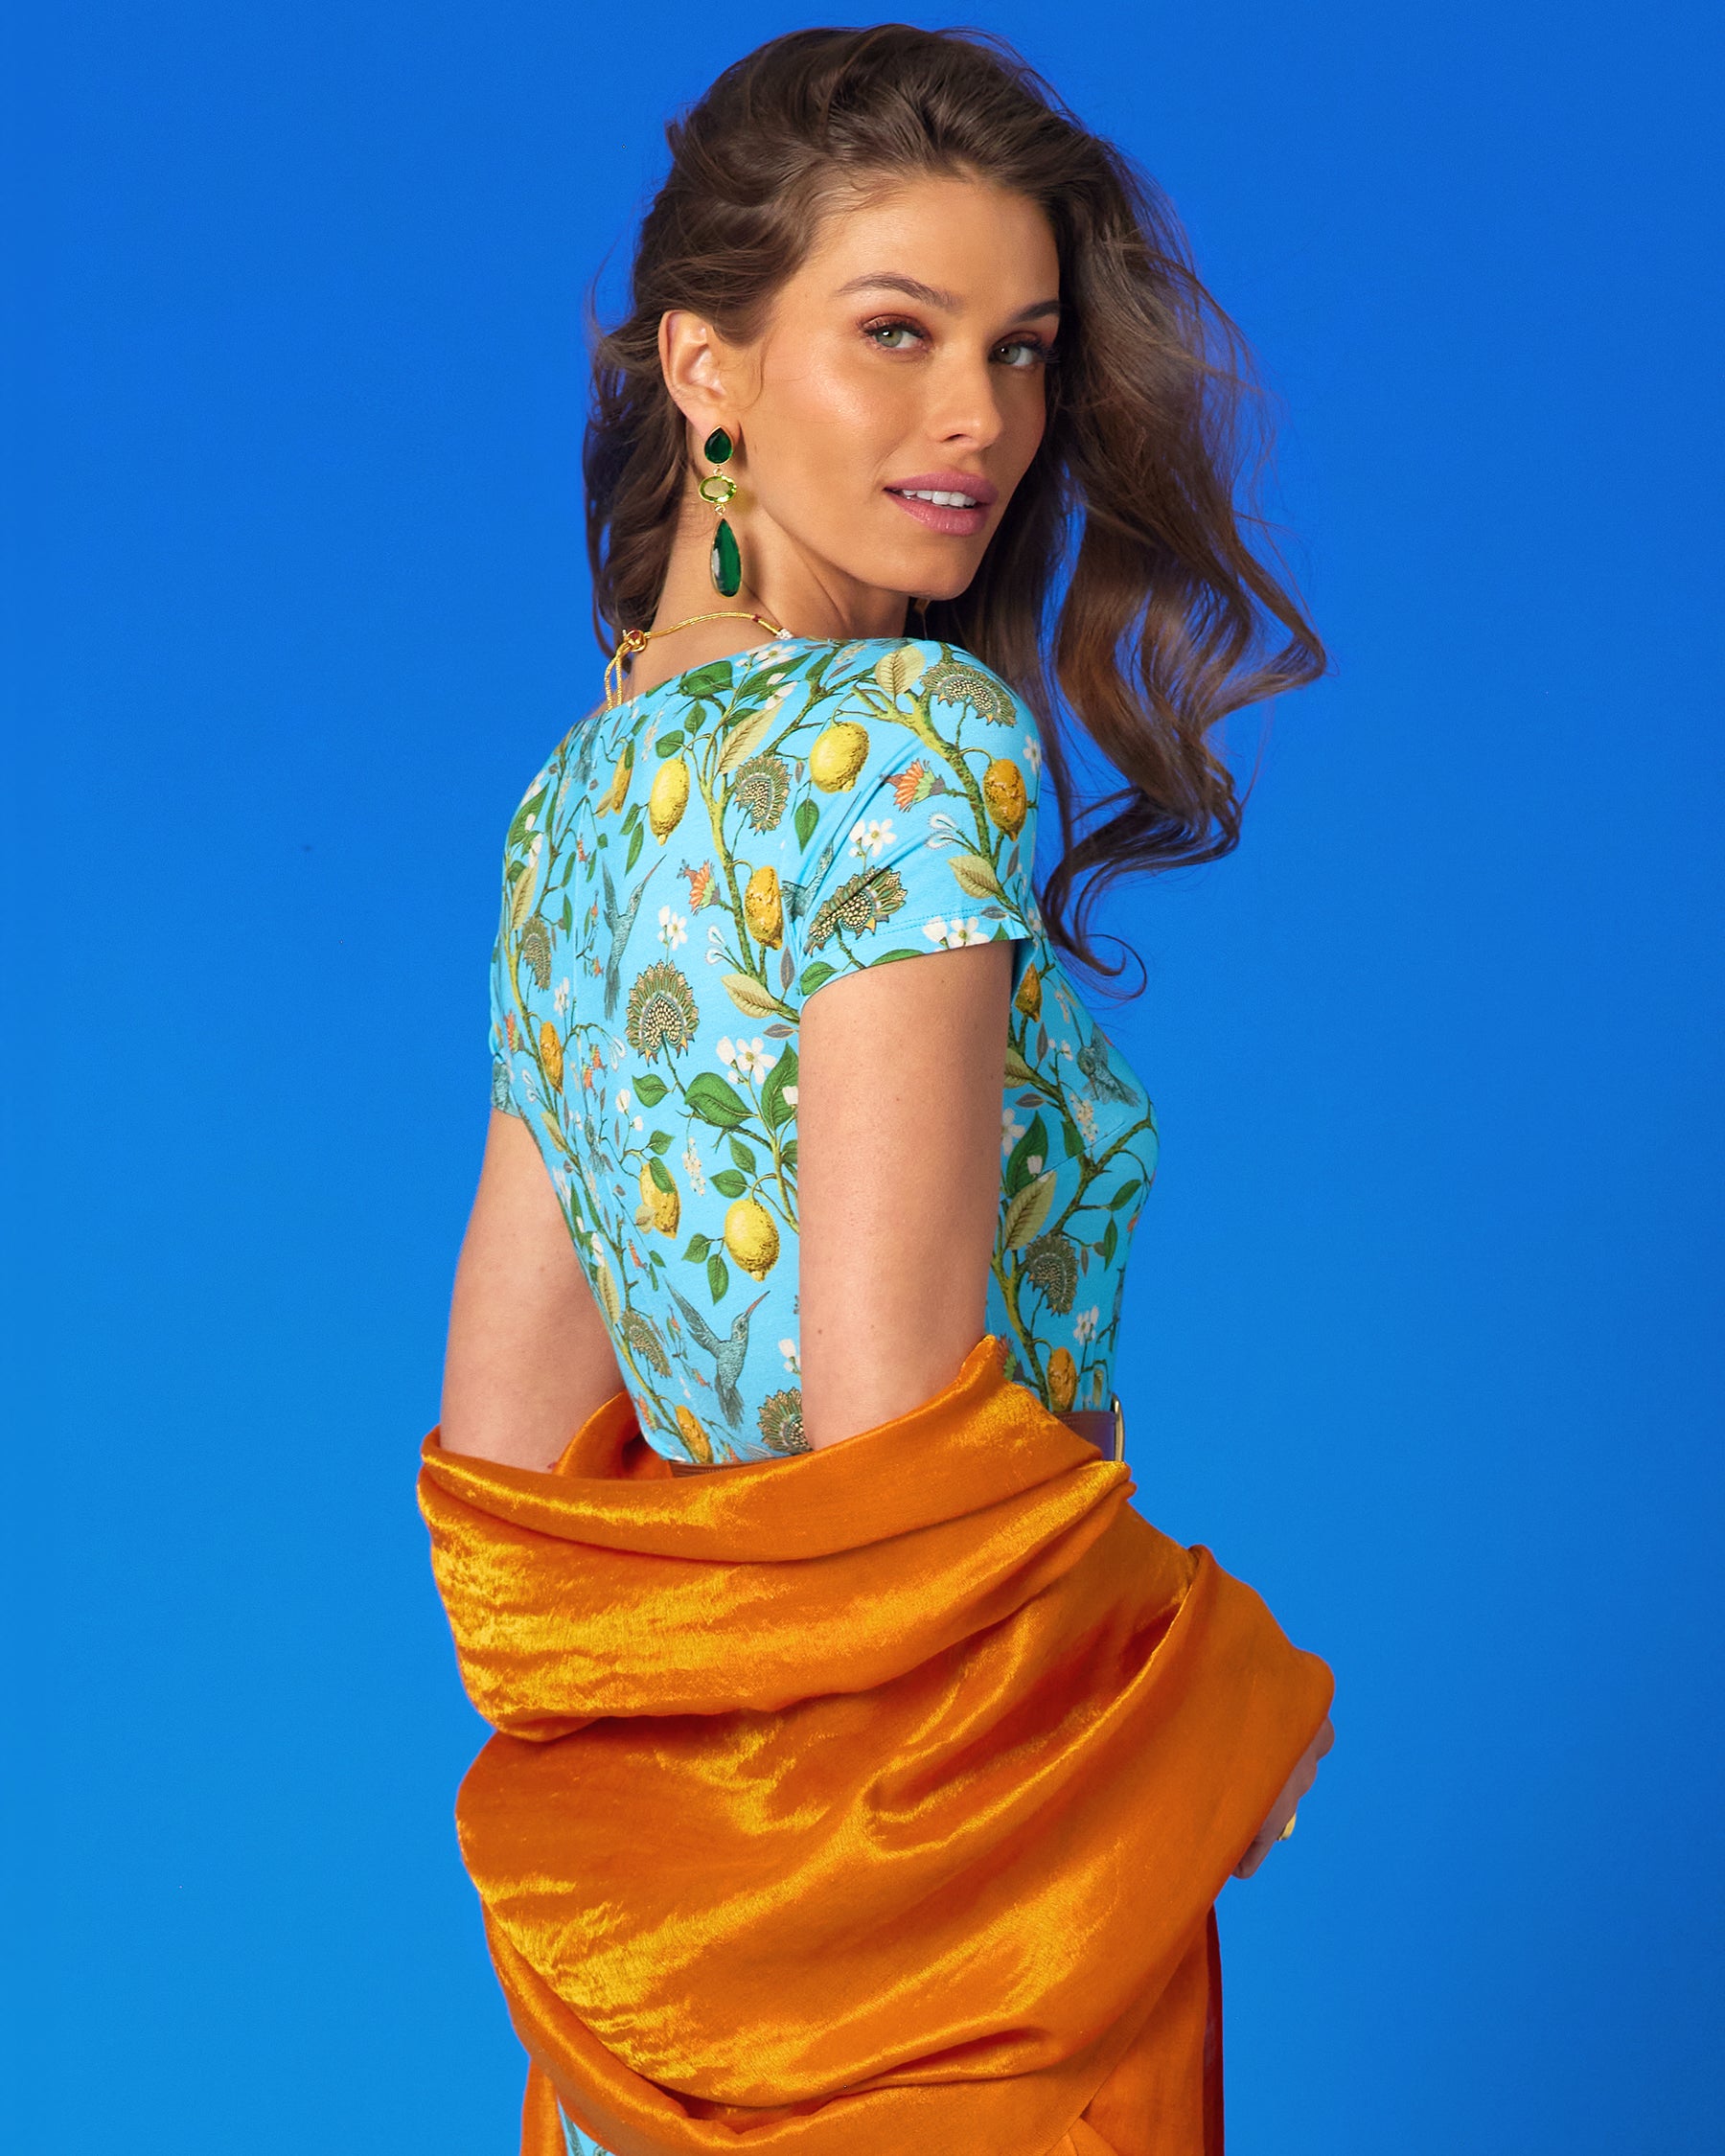 Josephine Reversible Pashmina Shawl in Gold Shimmer Coral Orange worn with the Flora Long Stretch Dress in Turquoise Hummingbird Print-Back View